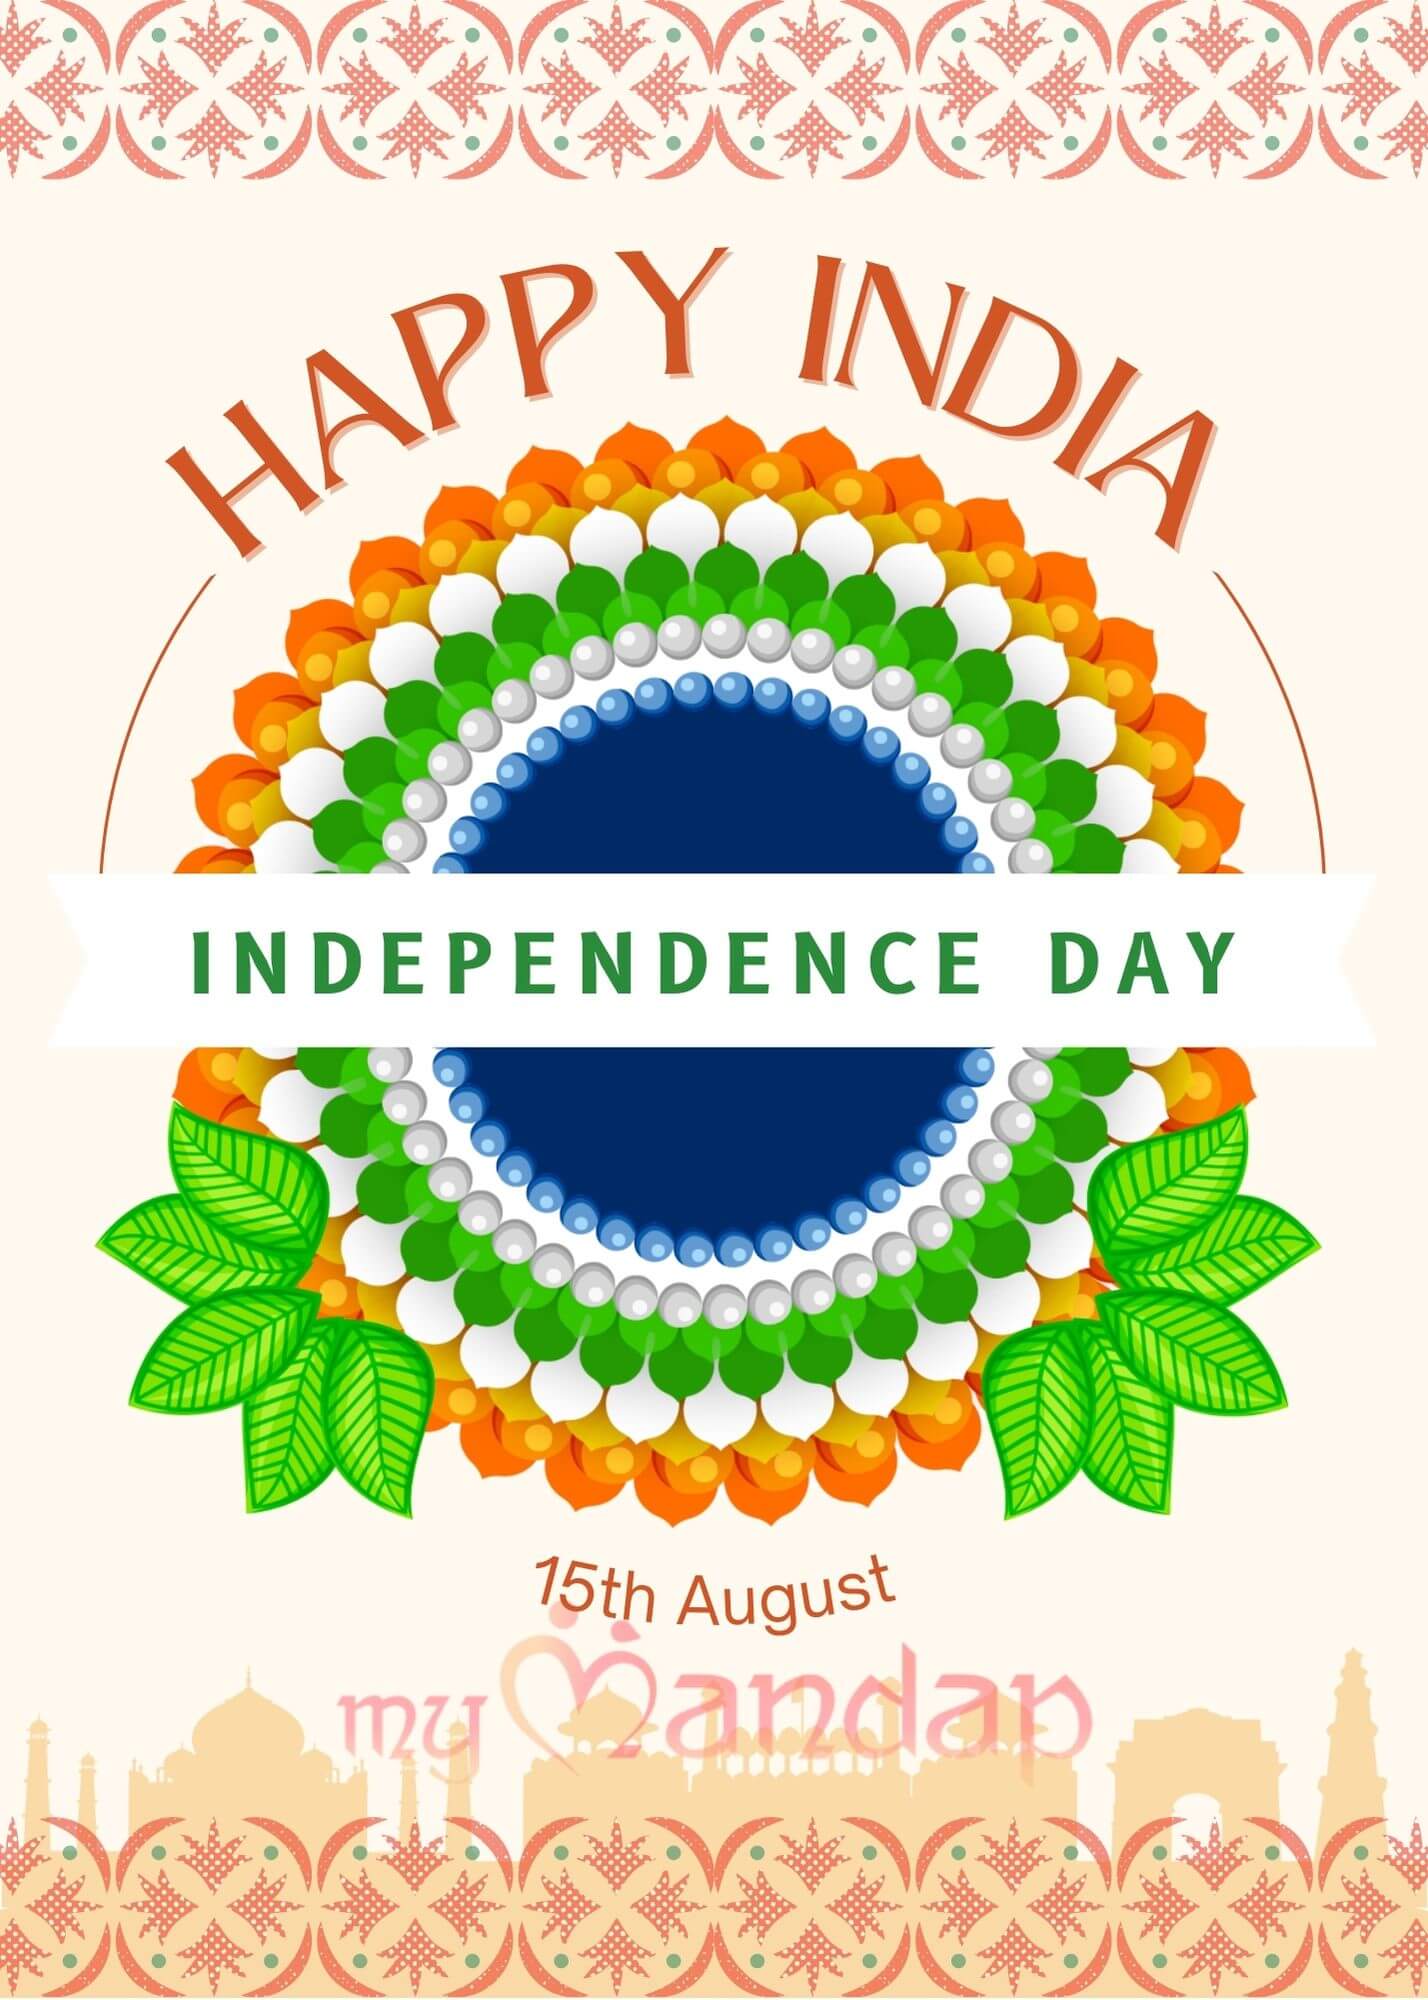 Happy India Independence Day Card